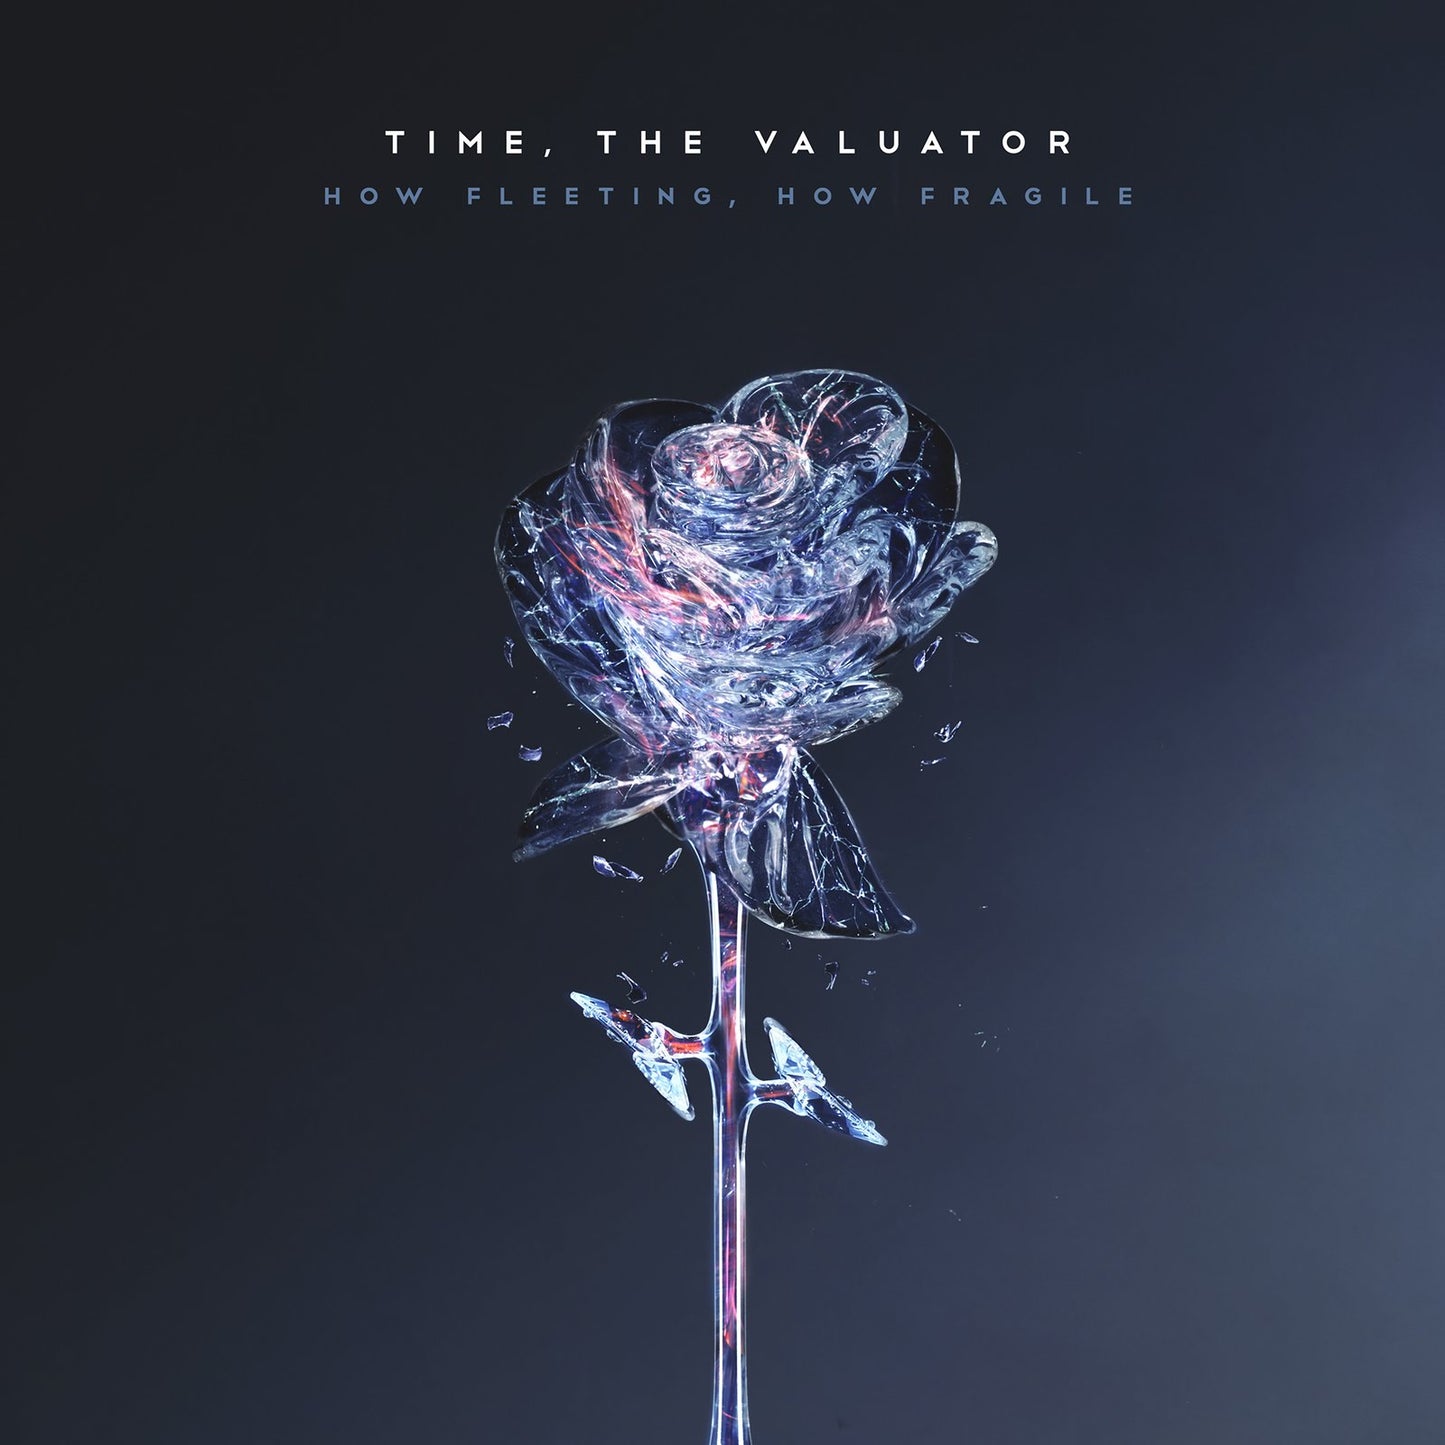 Time, The Valuator "How Fleeting, How Fragile" CD